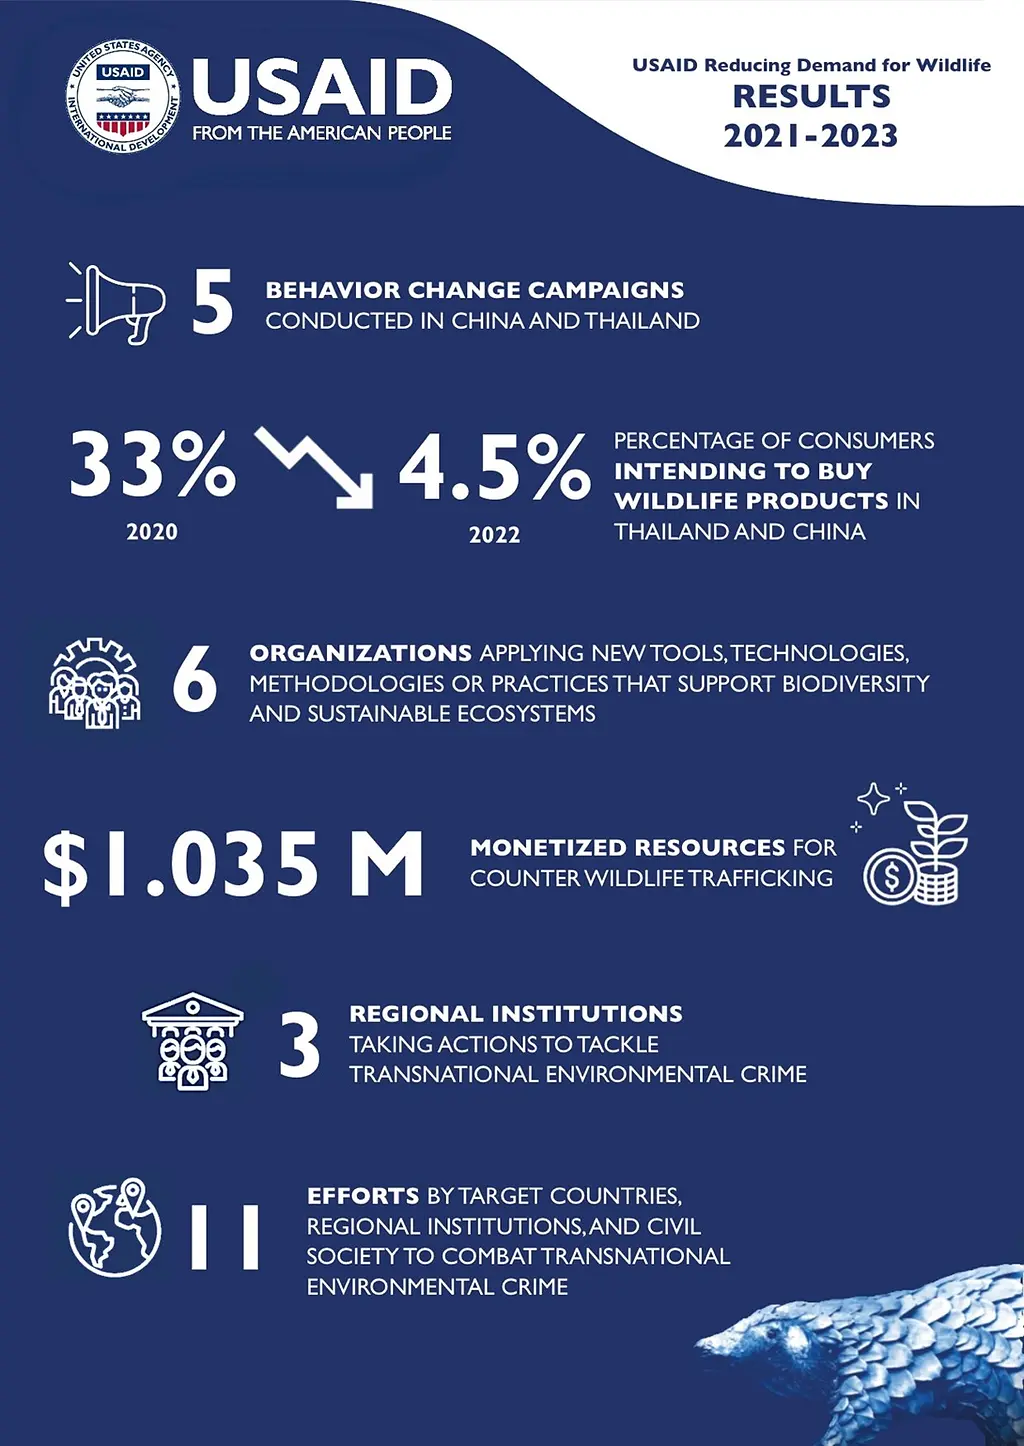 Graphic showing the results of USAID's Reducing Demand for Wildlife initiative